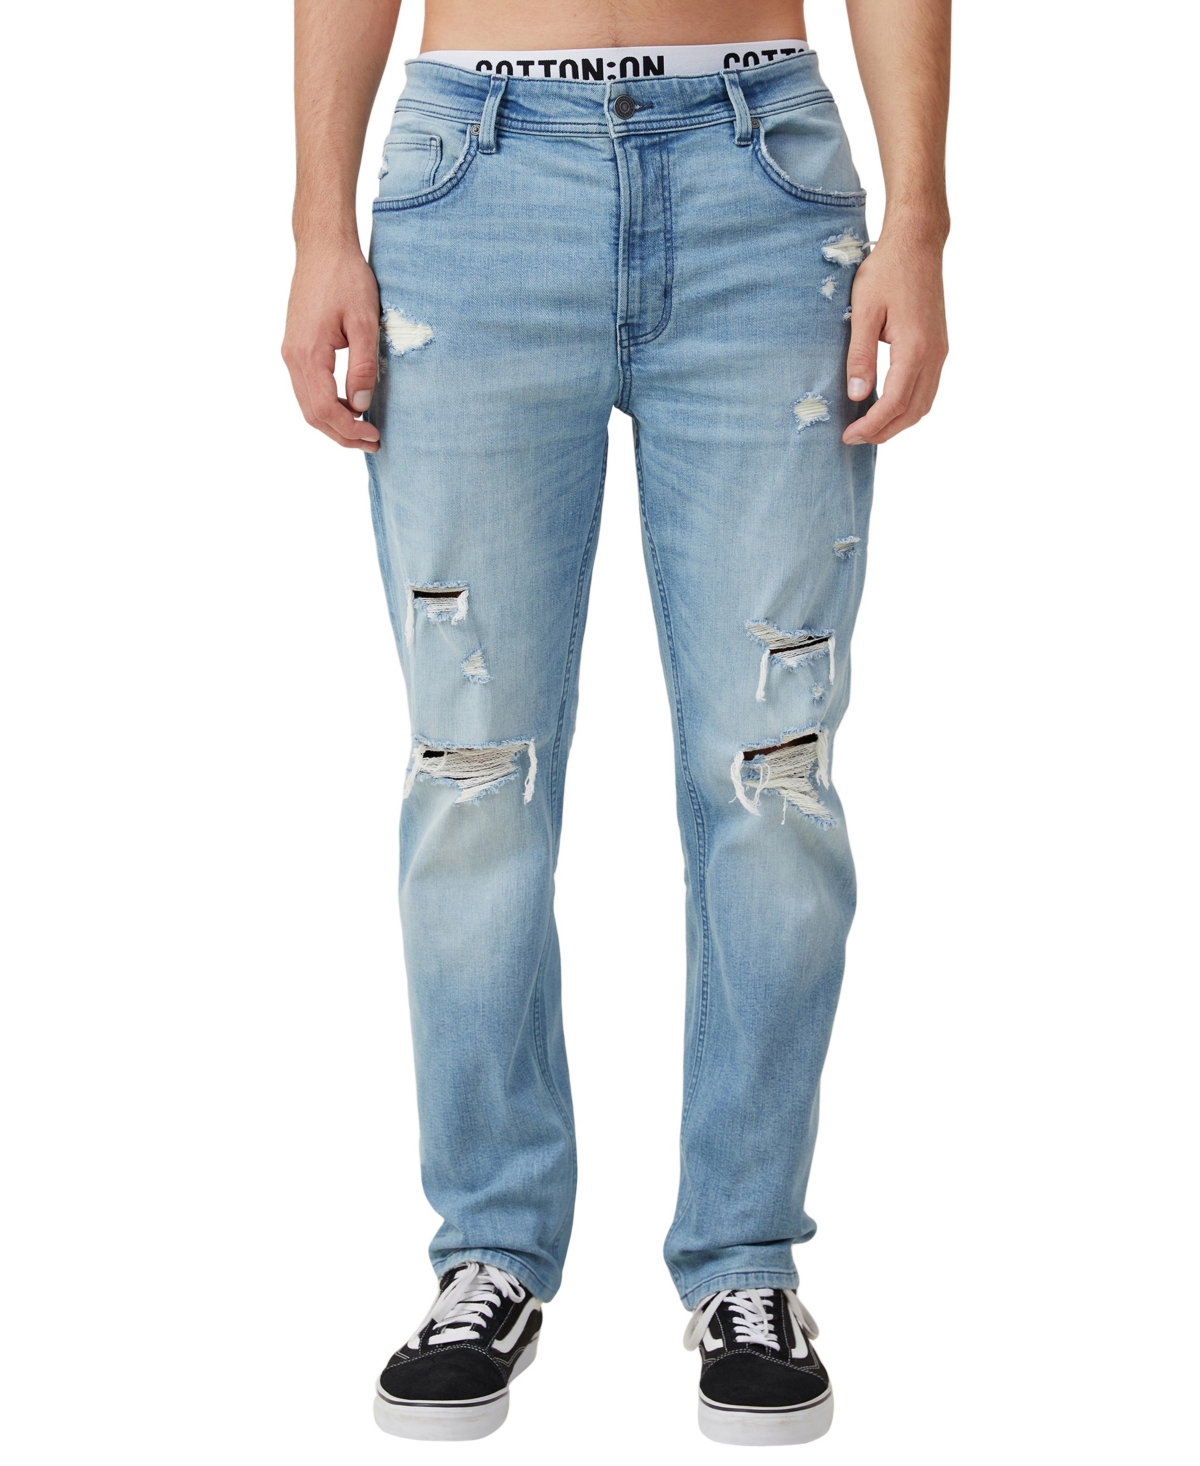 Cotton On Men's Slim Straight Jeans In Cali Blue Ripped